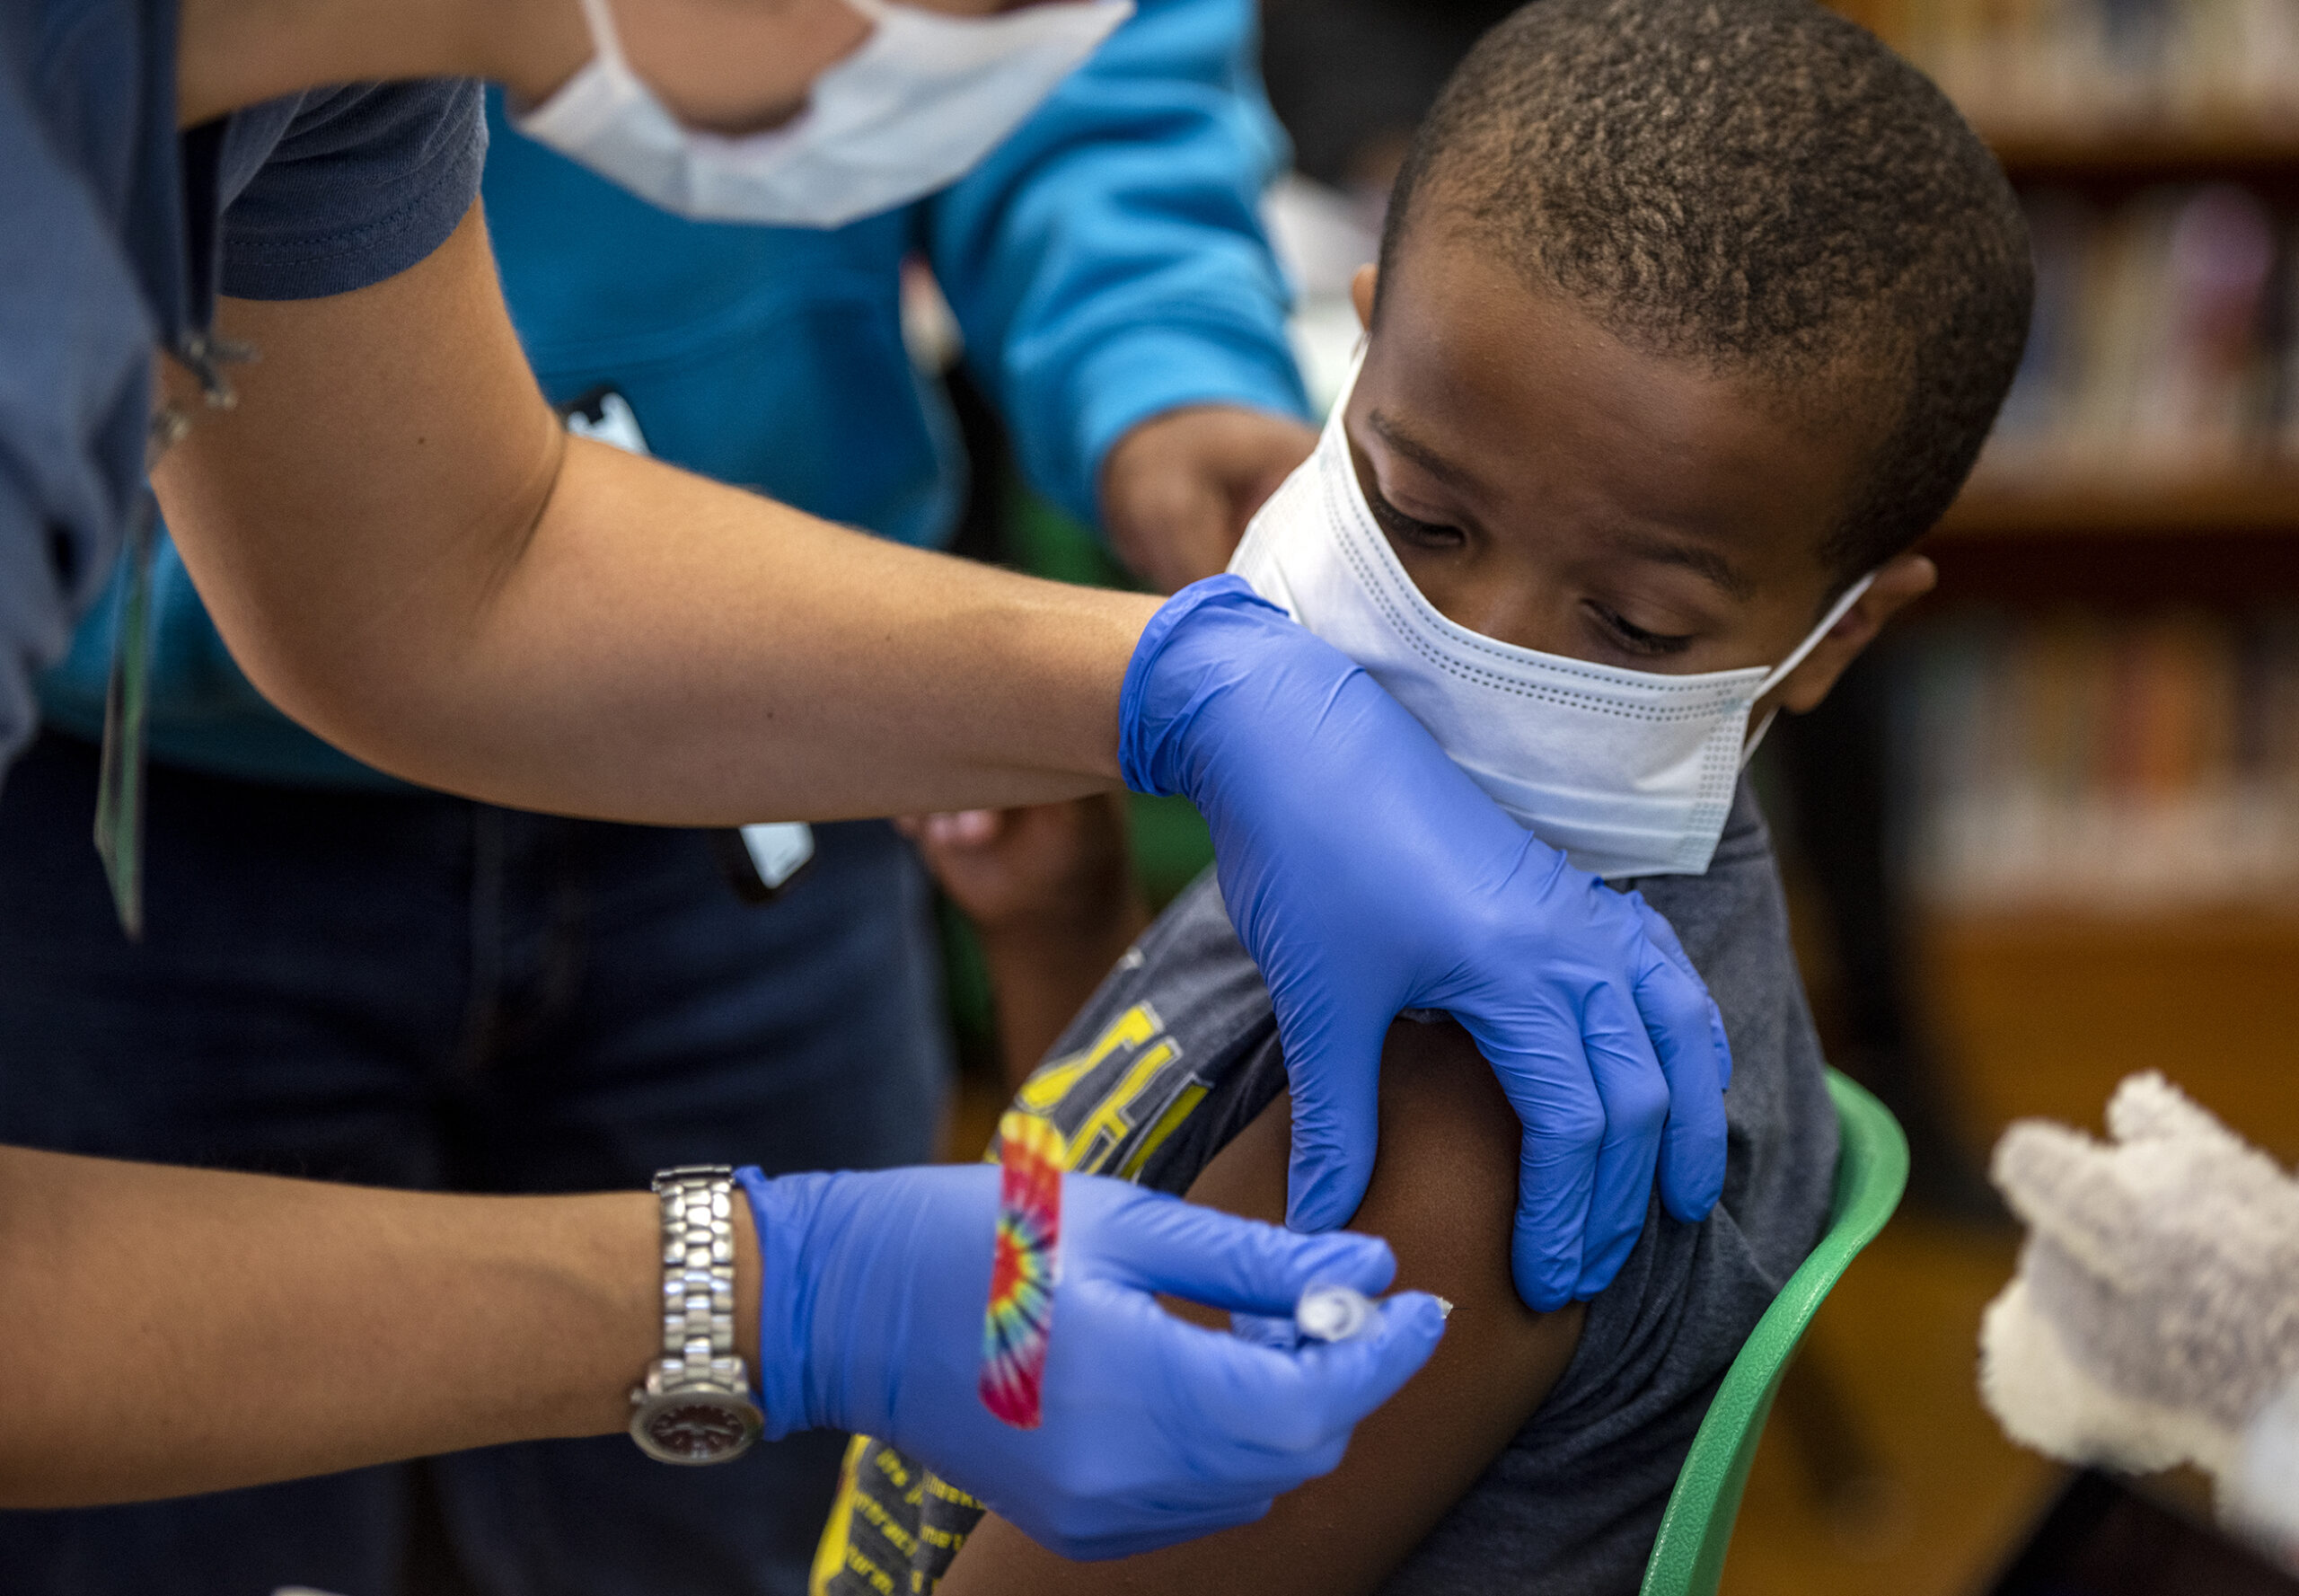 A boy wearing a face mask looks over his shoulder as he receives a shot.